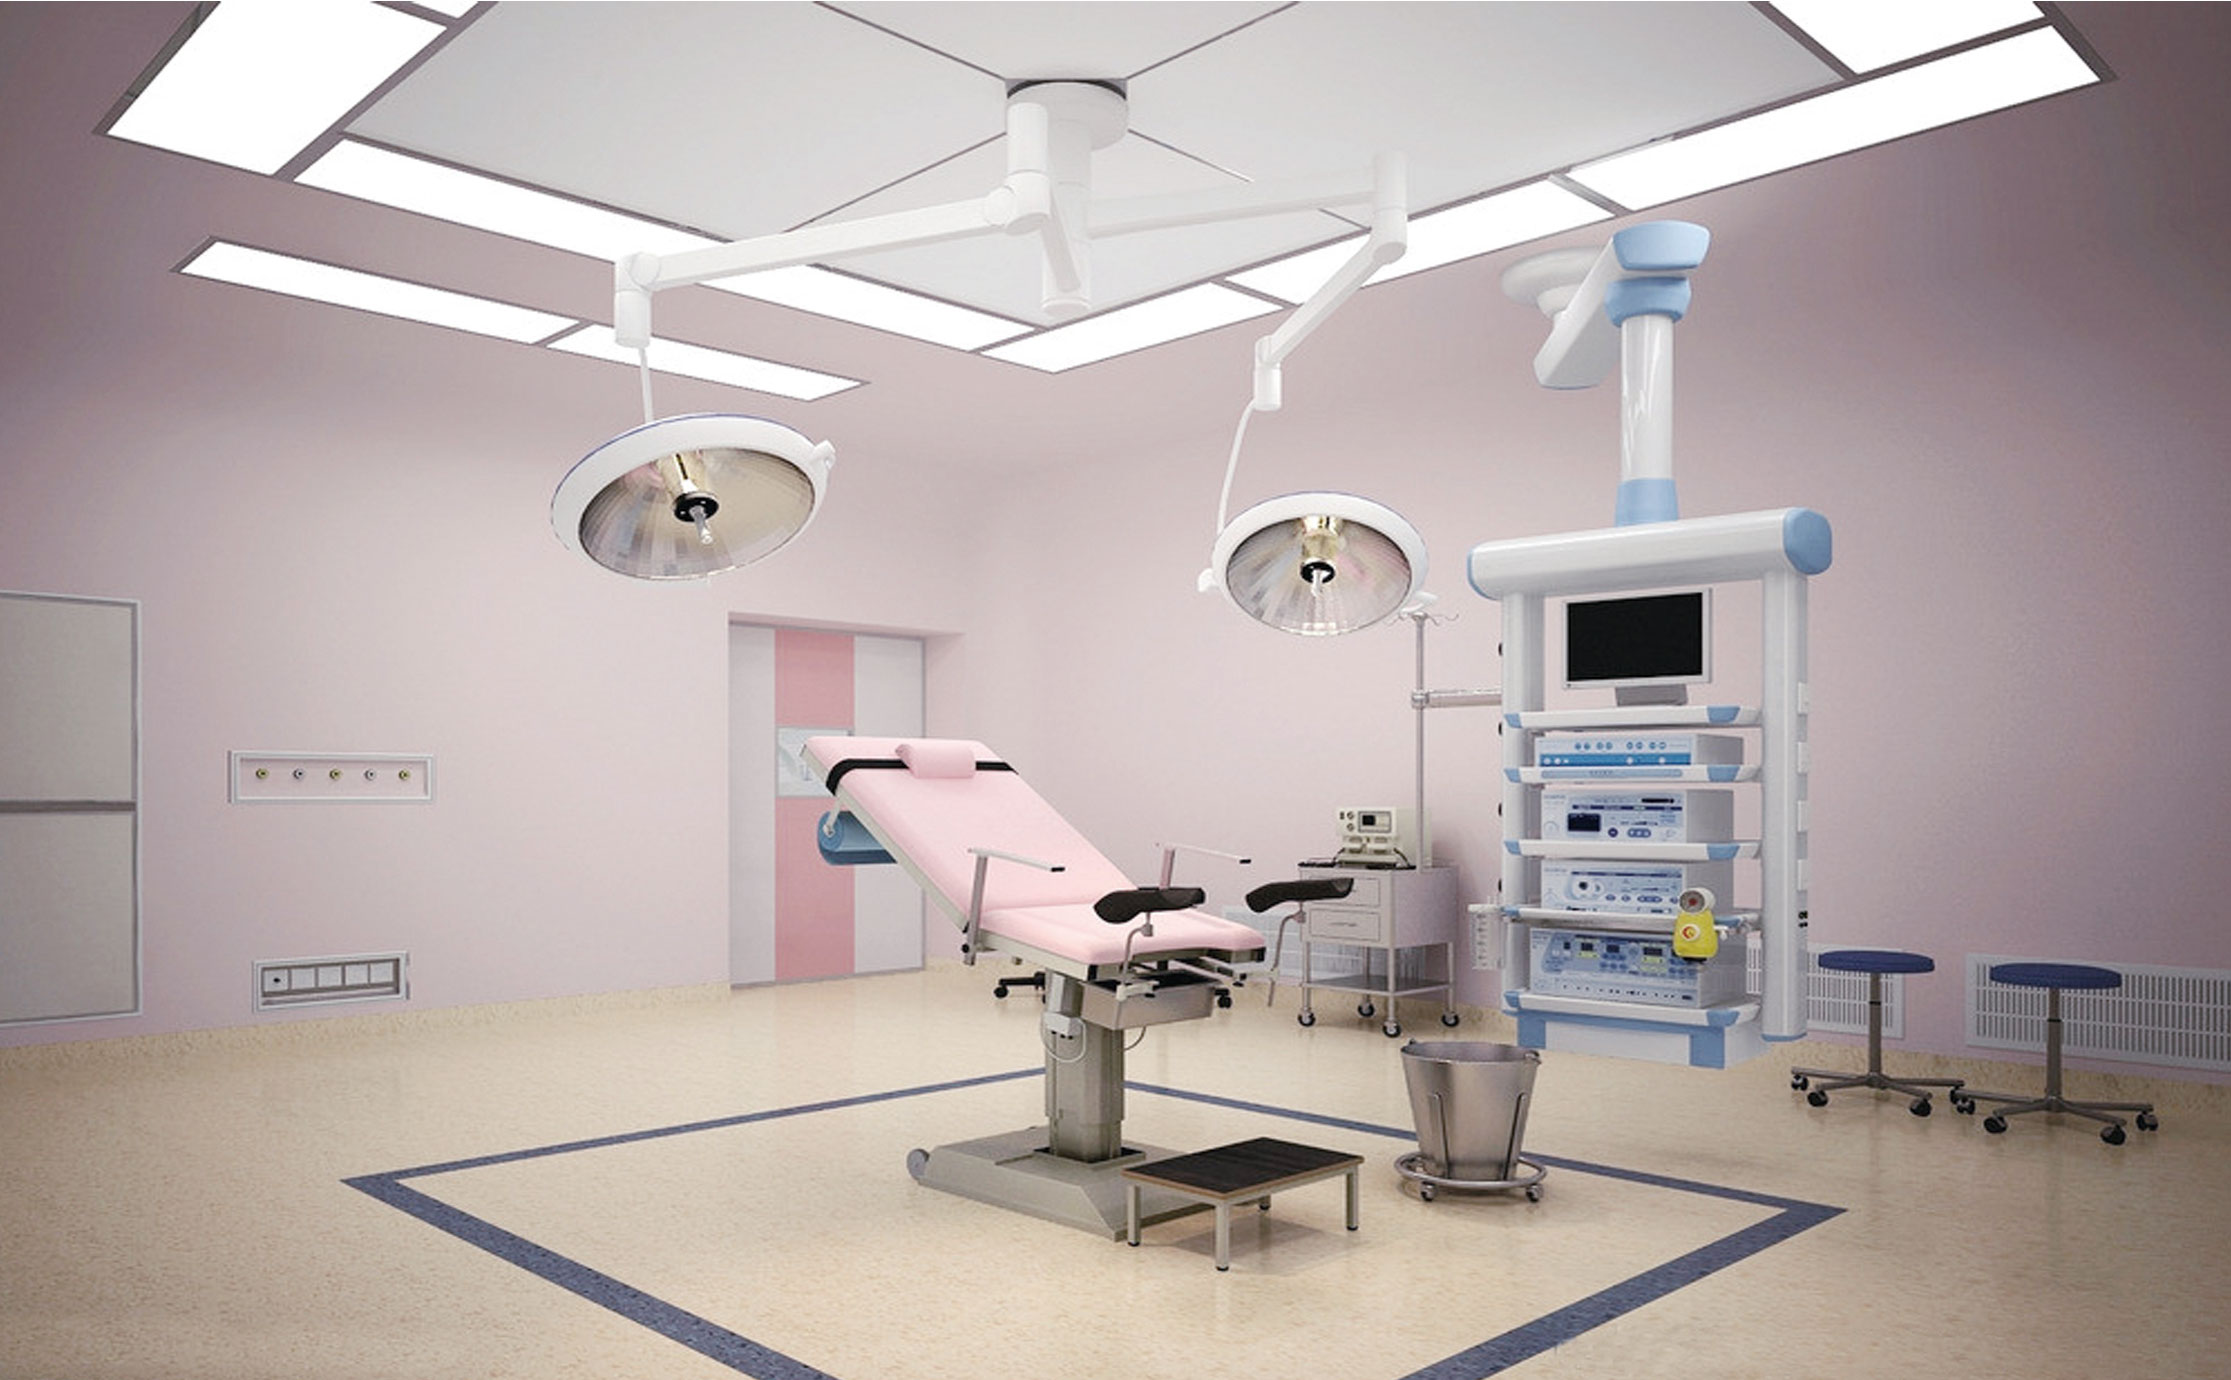 >Requirements of clean laminar flow hood and air supply ceiling in operating room of hospital